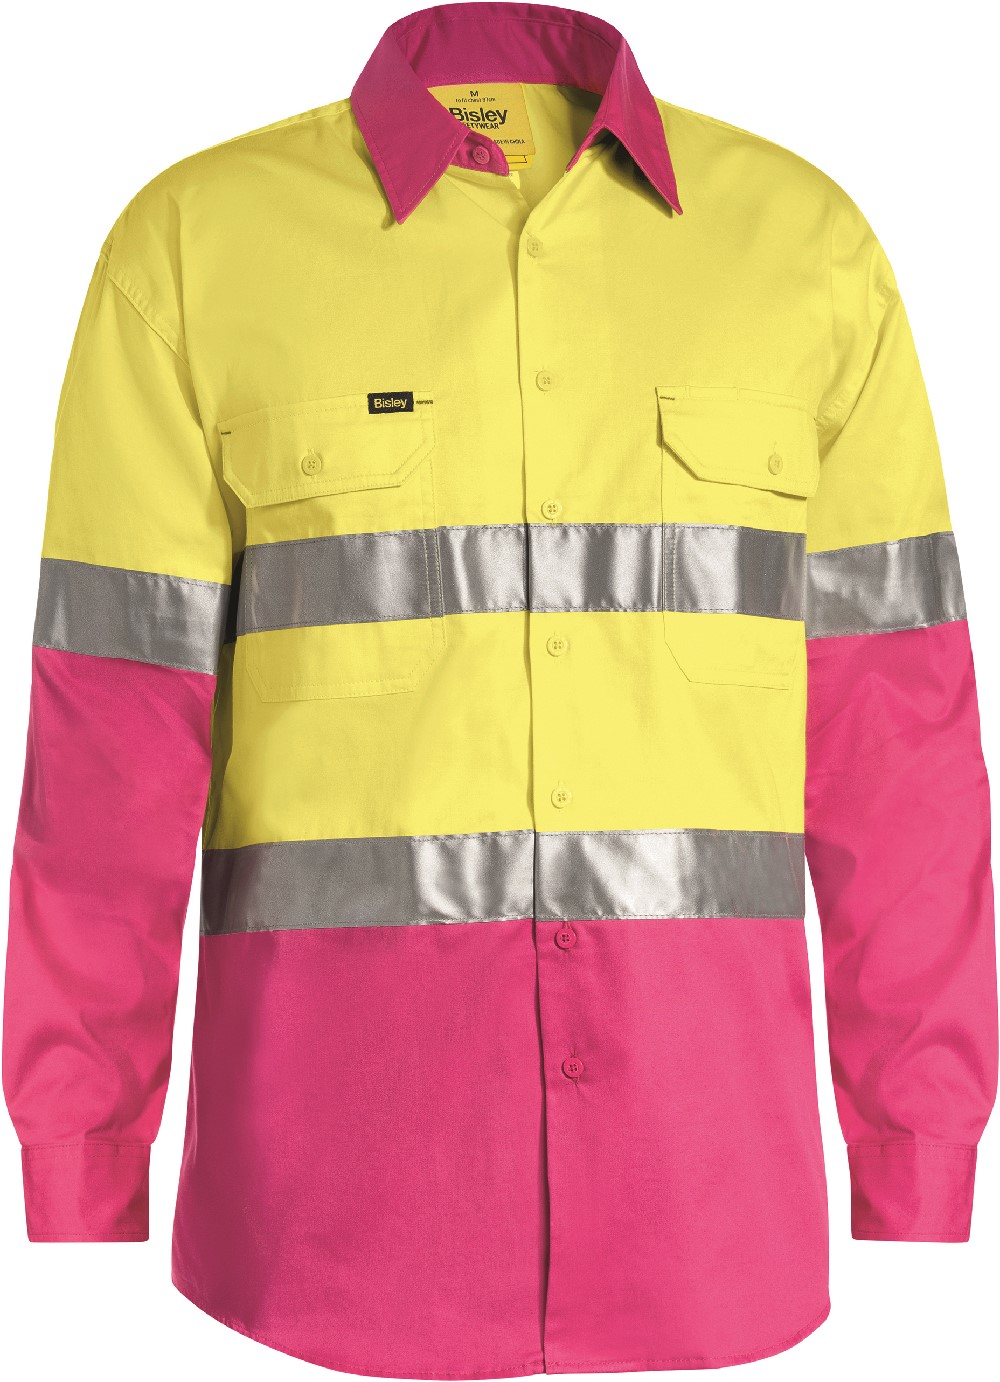 SHIRT L/S COOL WEIGHT TAPED - YELLOW/PINK B/C FOUNDATION